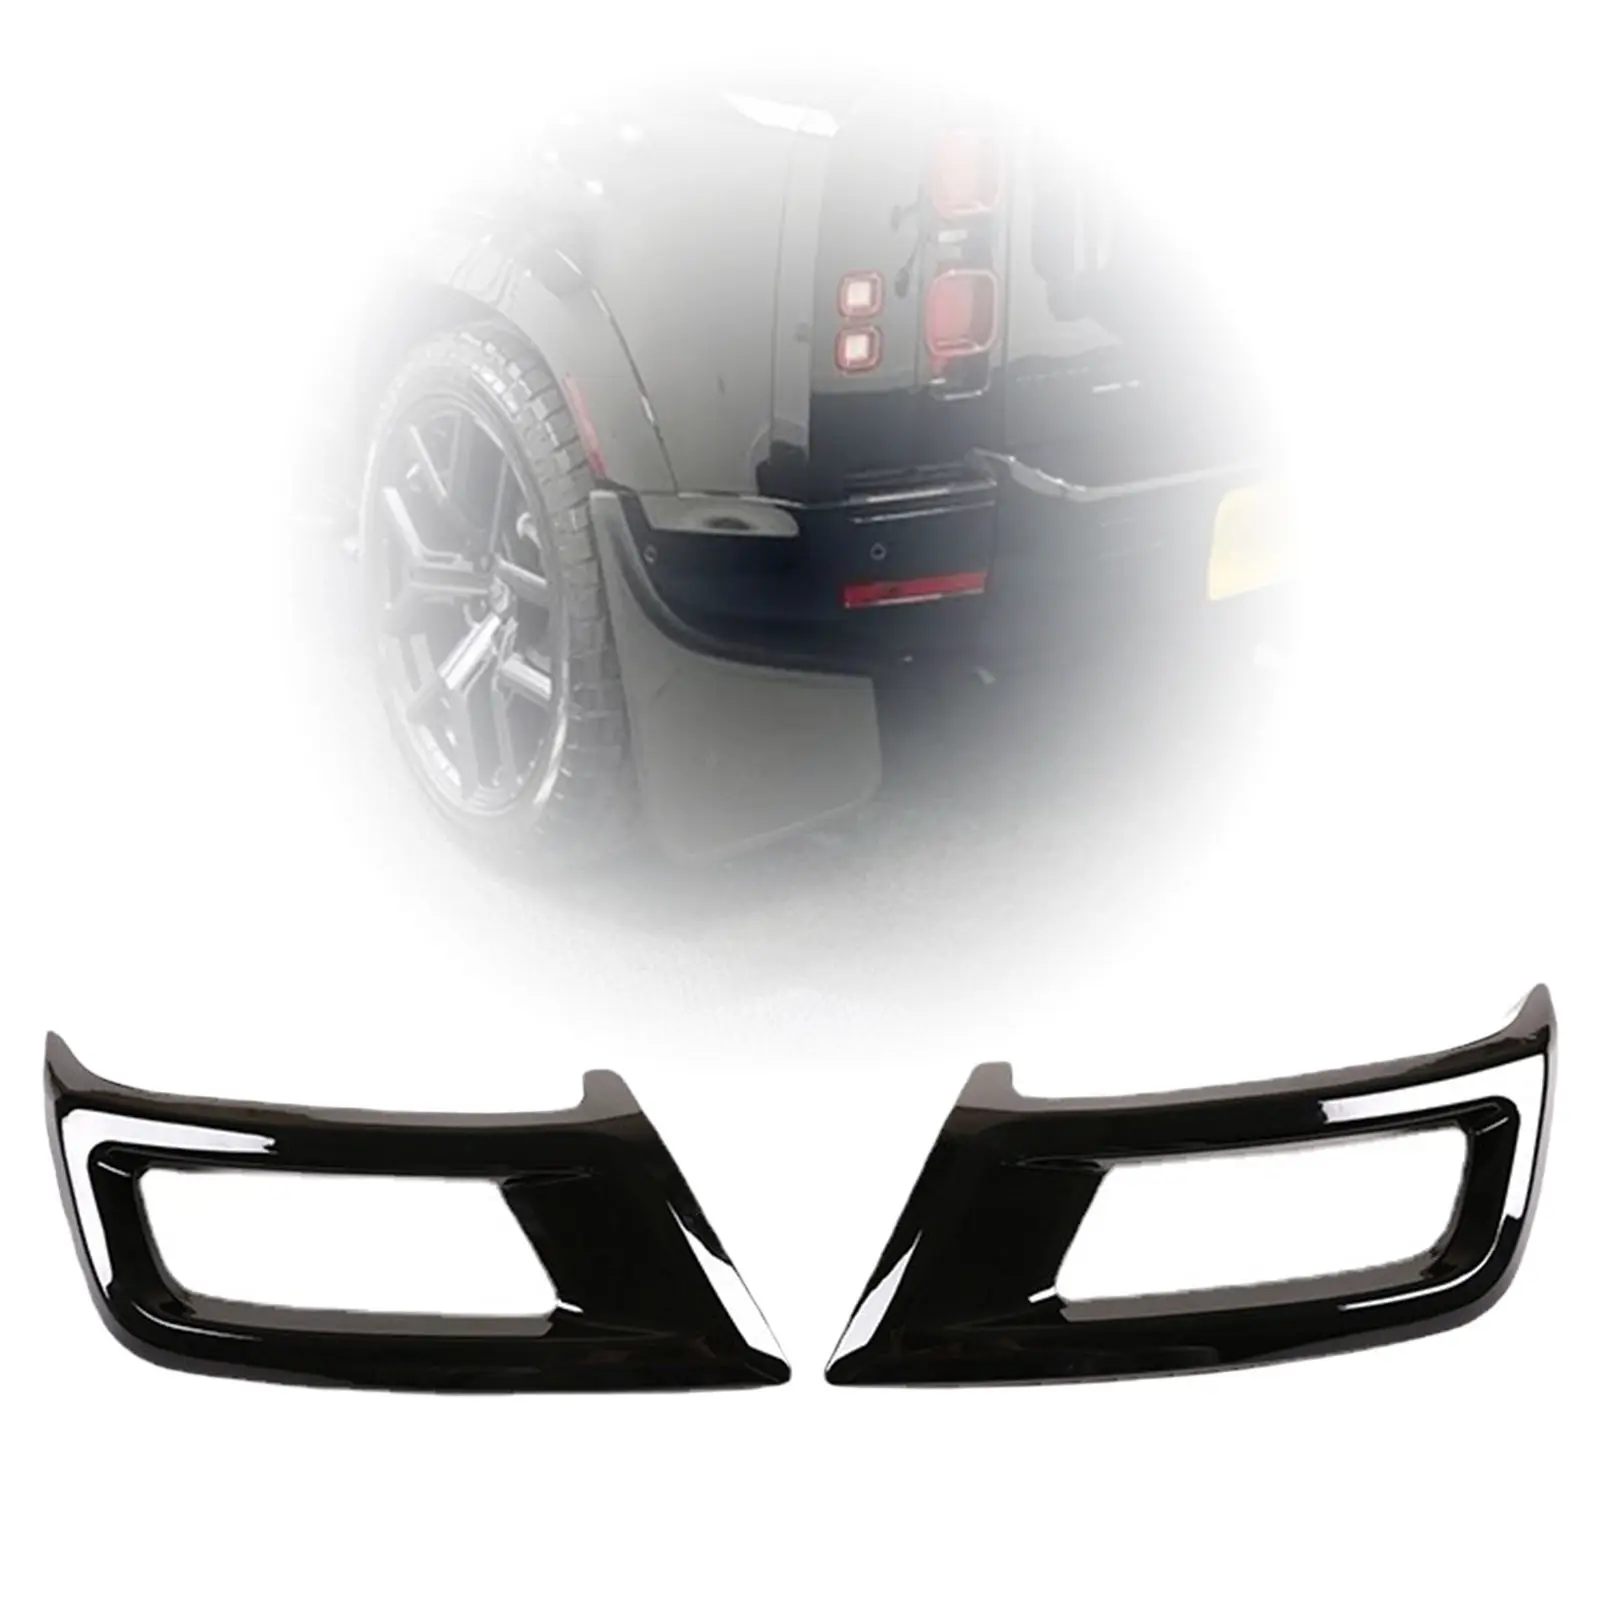 2 Pieces Rear Exhaust Pipe Throat Cover Trim Tail Throat Frame for Land Rover Discovery 2020 Durable Accessories